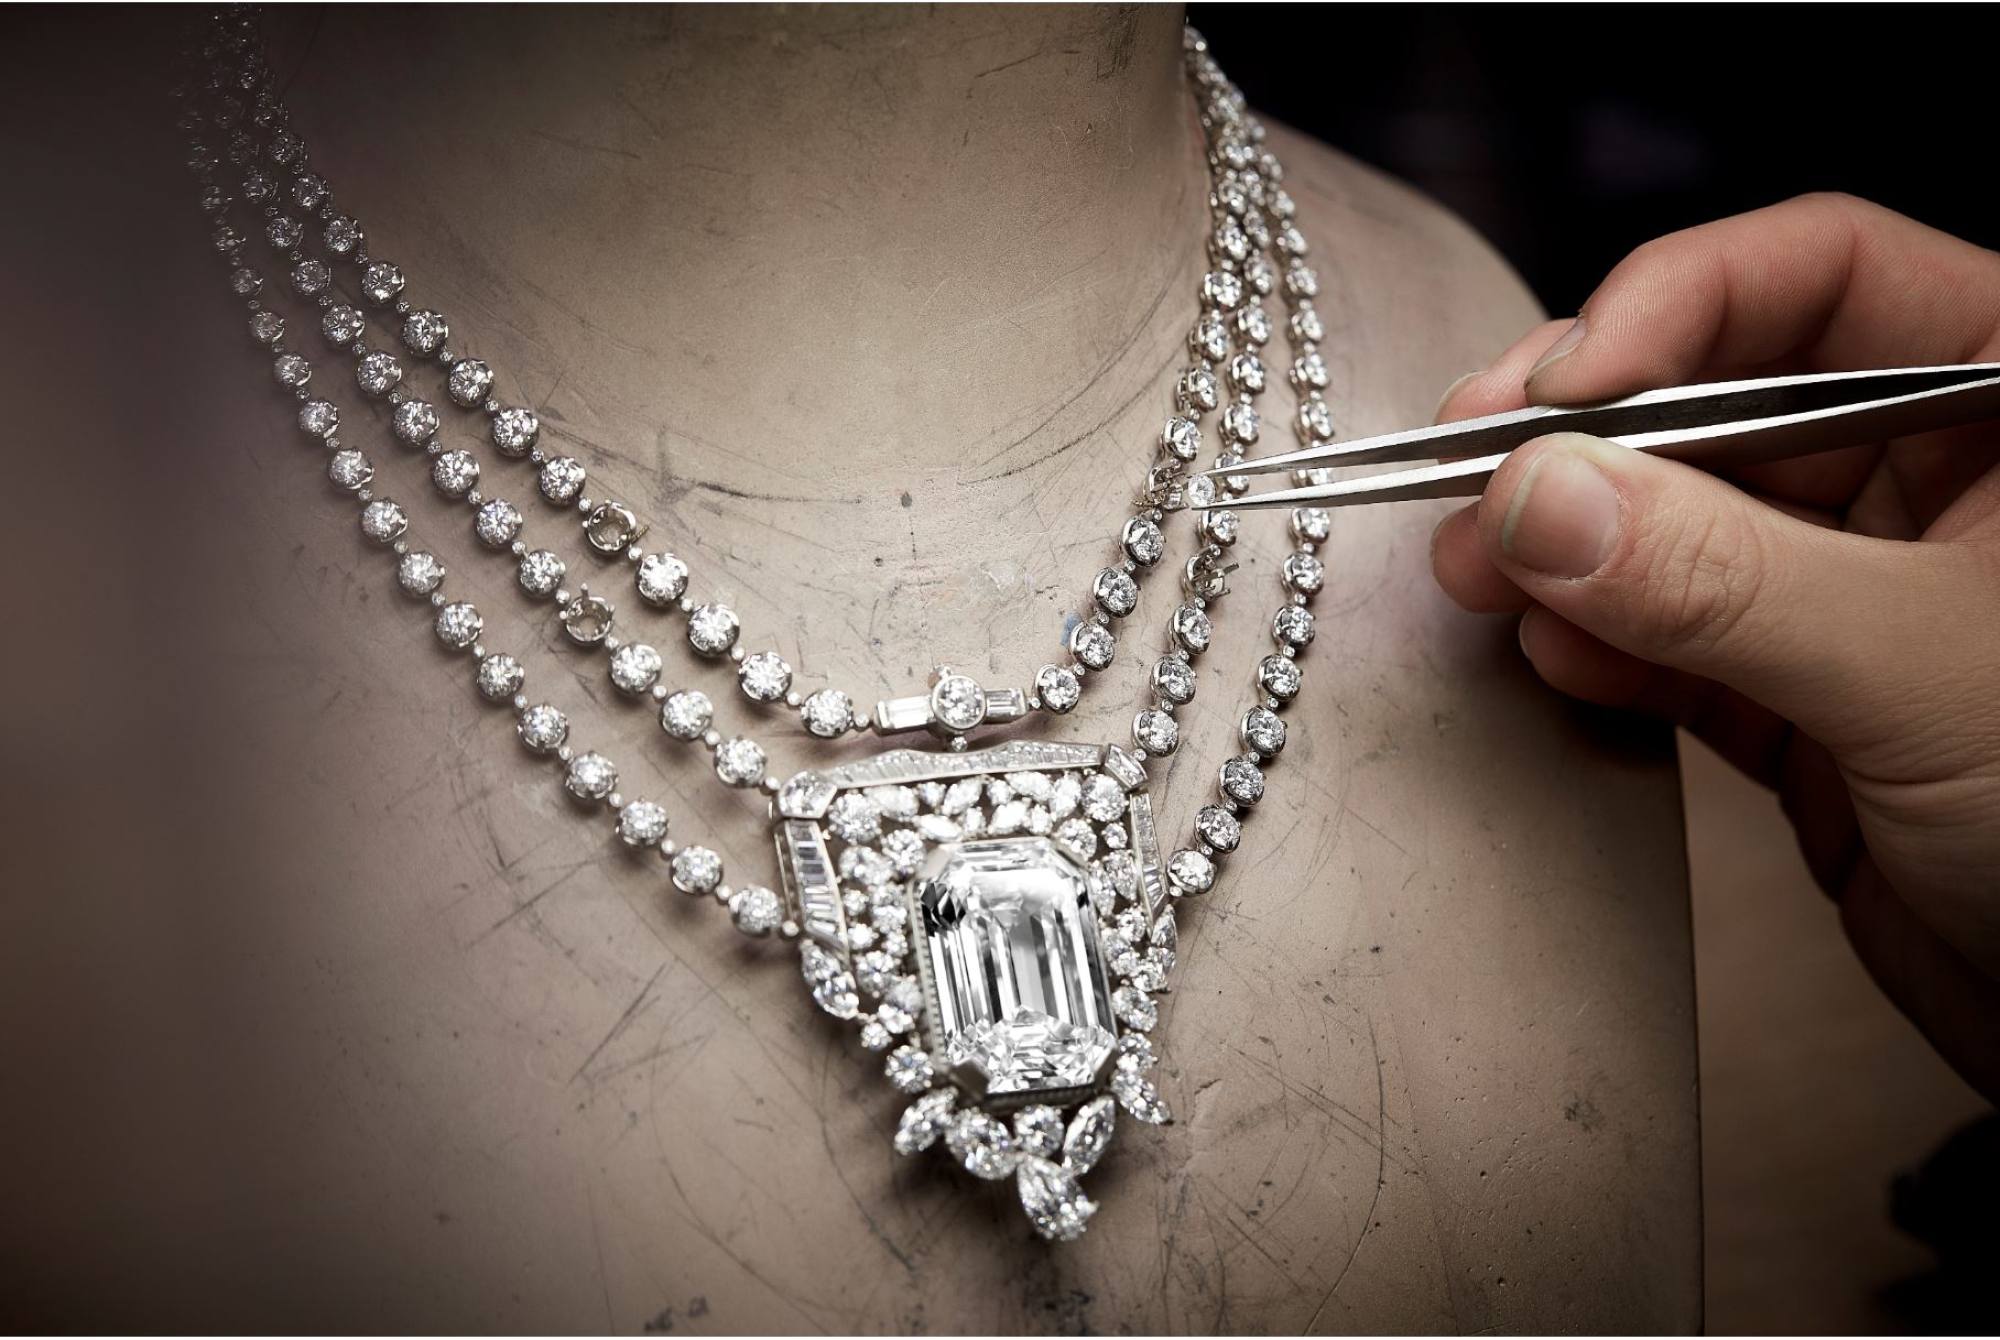 Chanel designs a 55.55-carat diamond necklace for the 100th anniversary of  its N°5 perfume